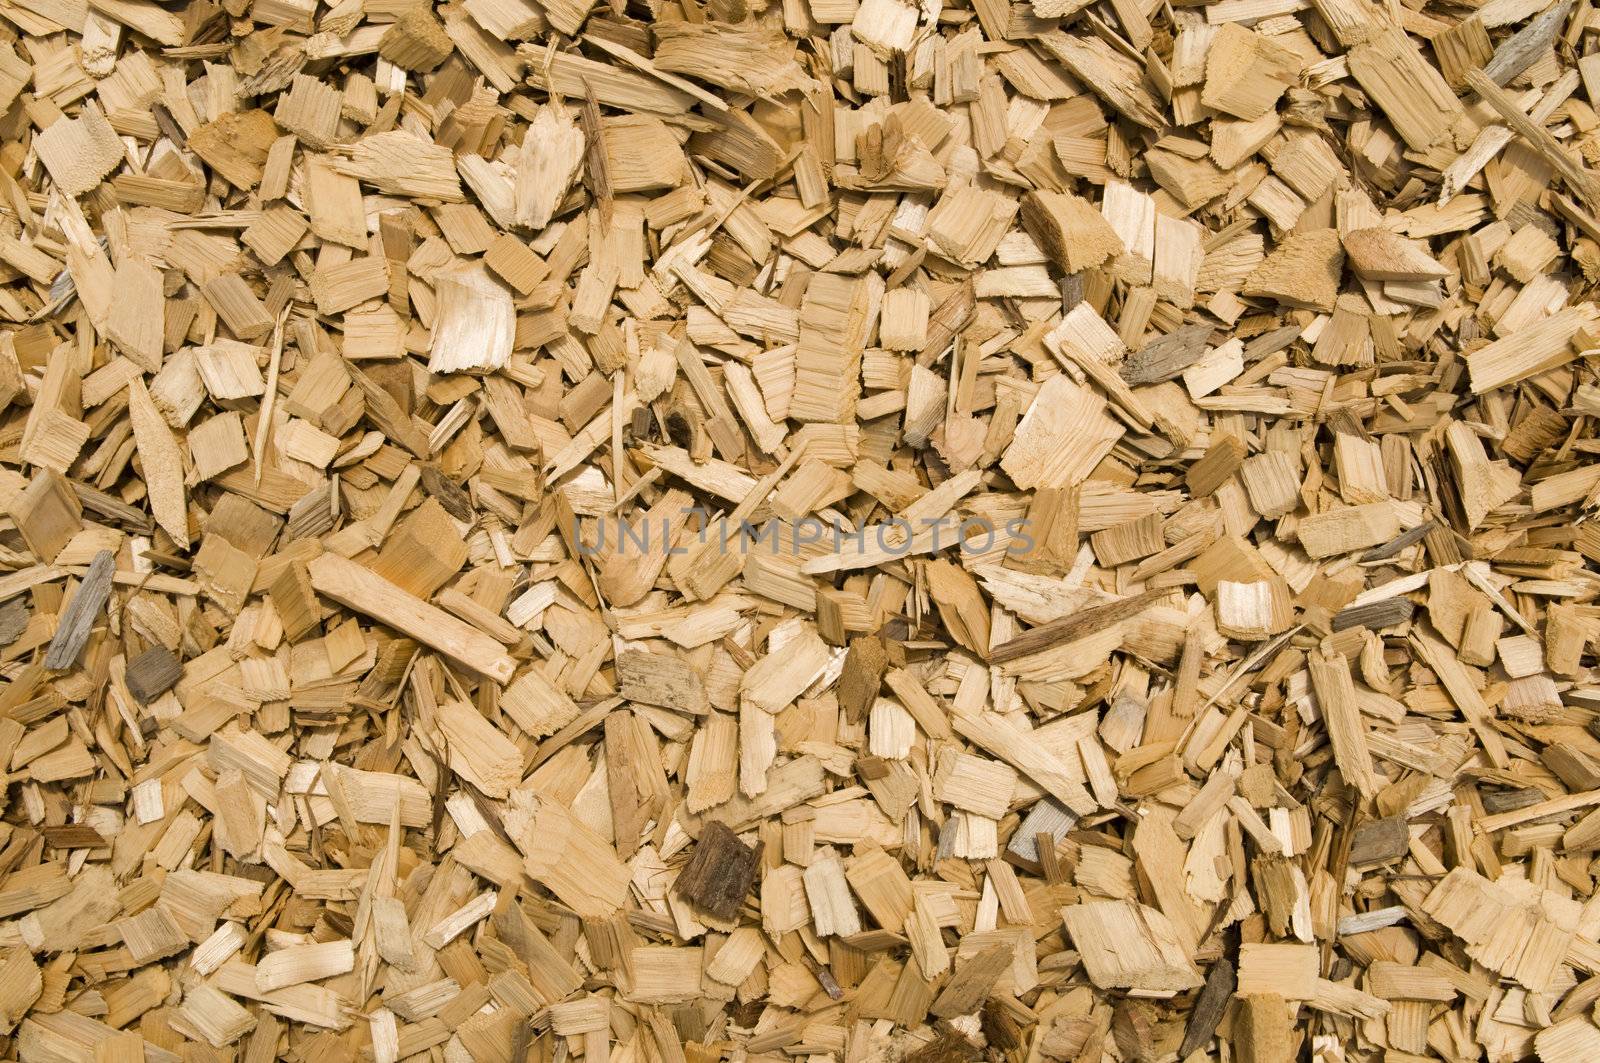 Wood Chip Background by Gordo25